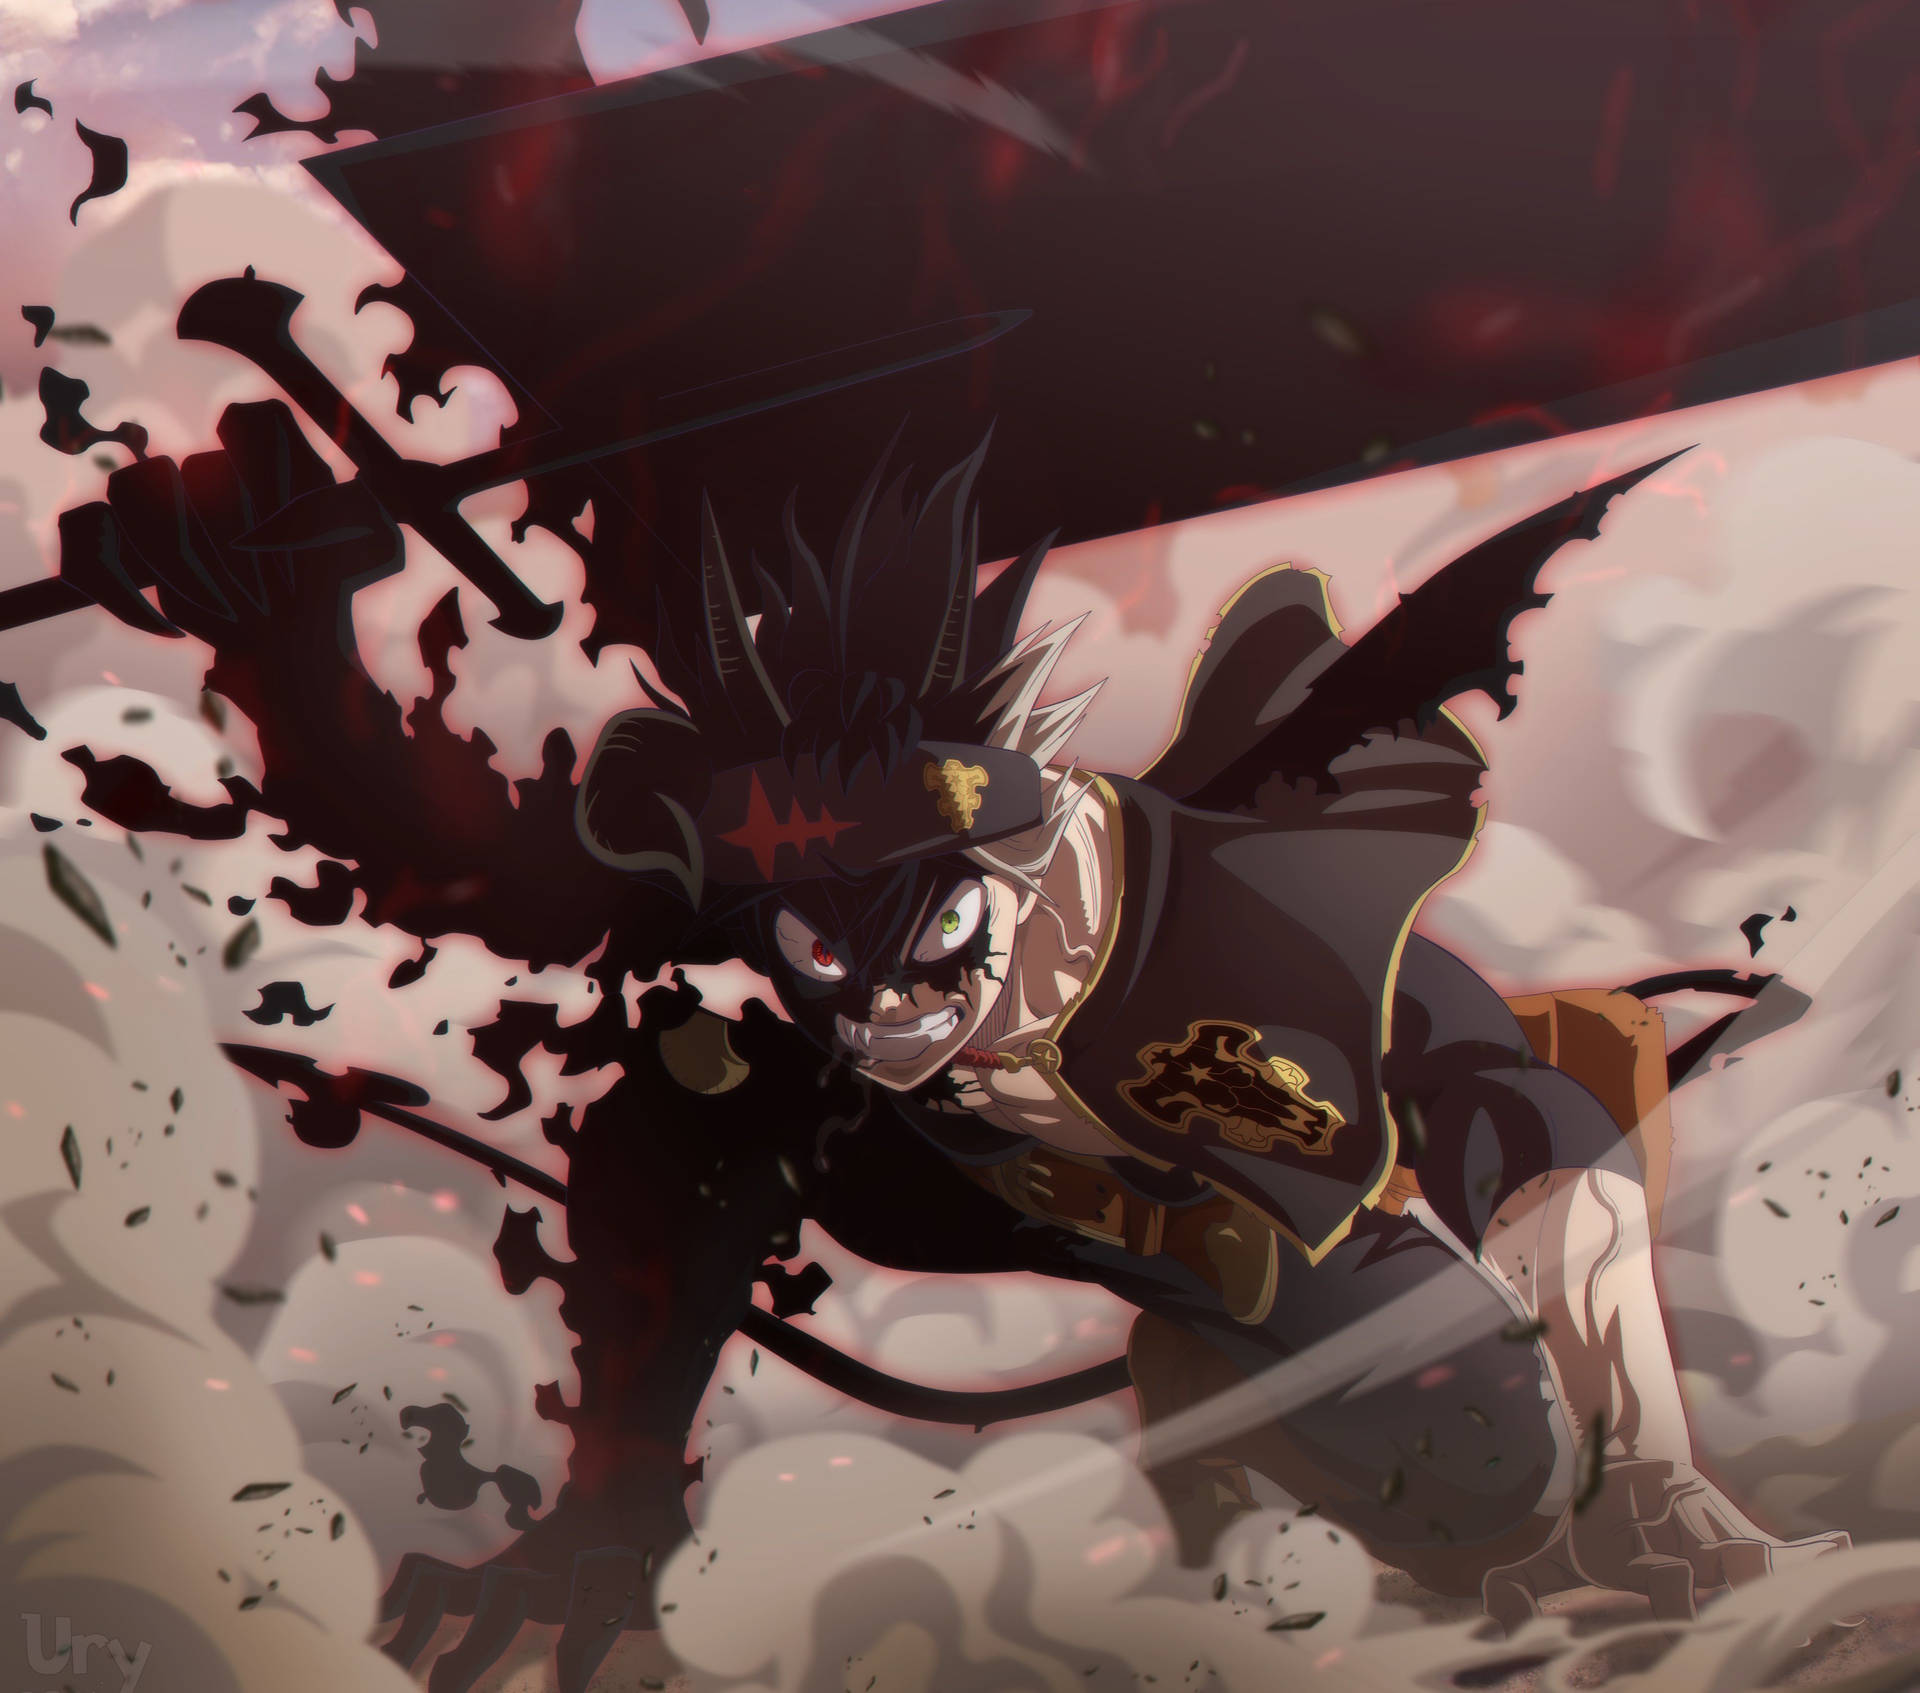 Top 999+ Liebe Black Clover Wallpaper Full HD, 4K✅Free to Use